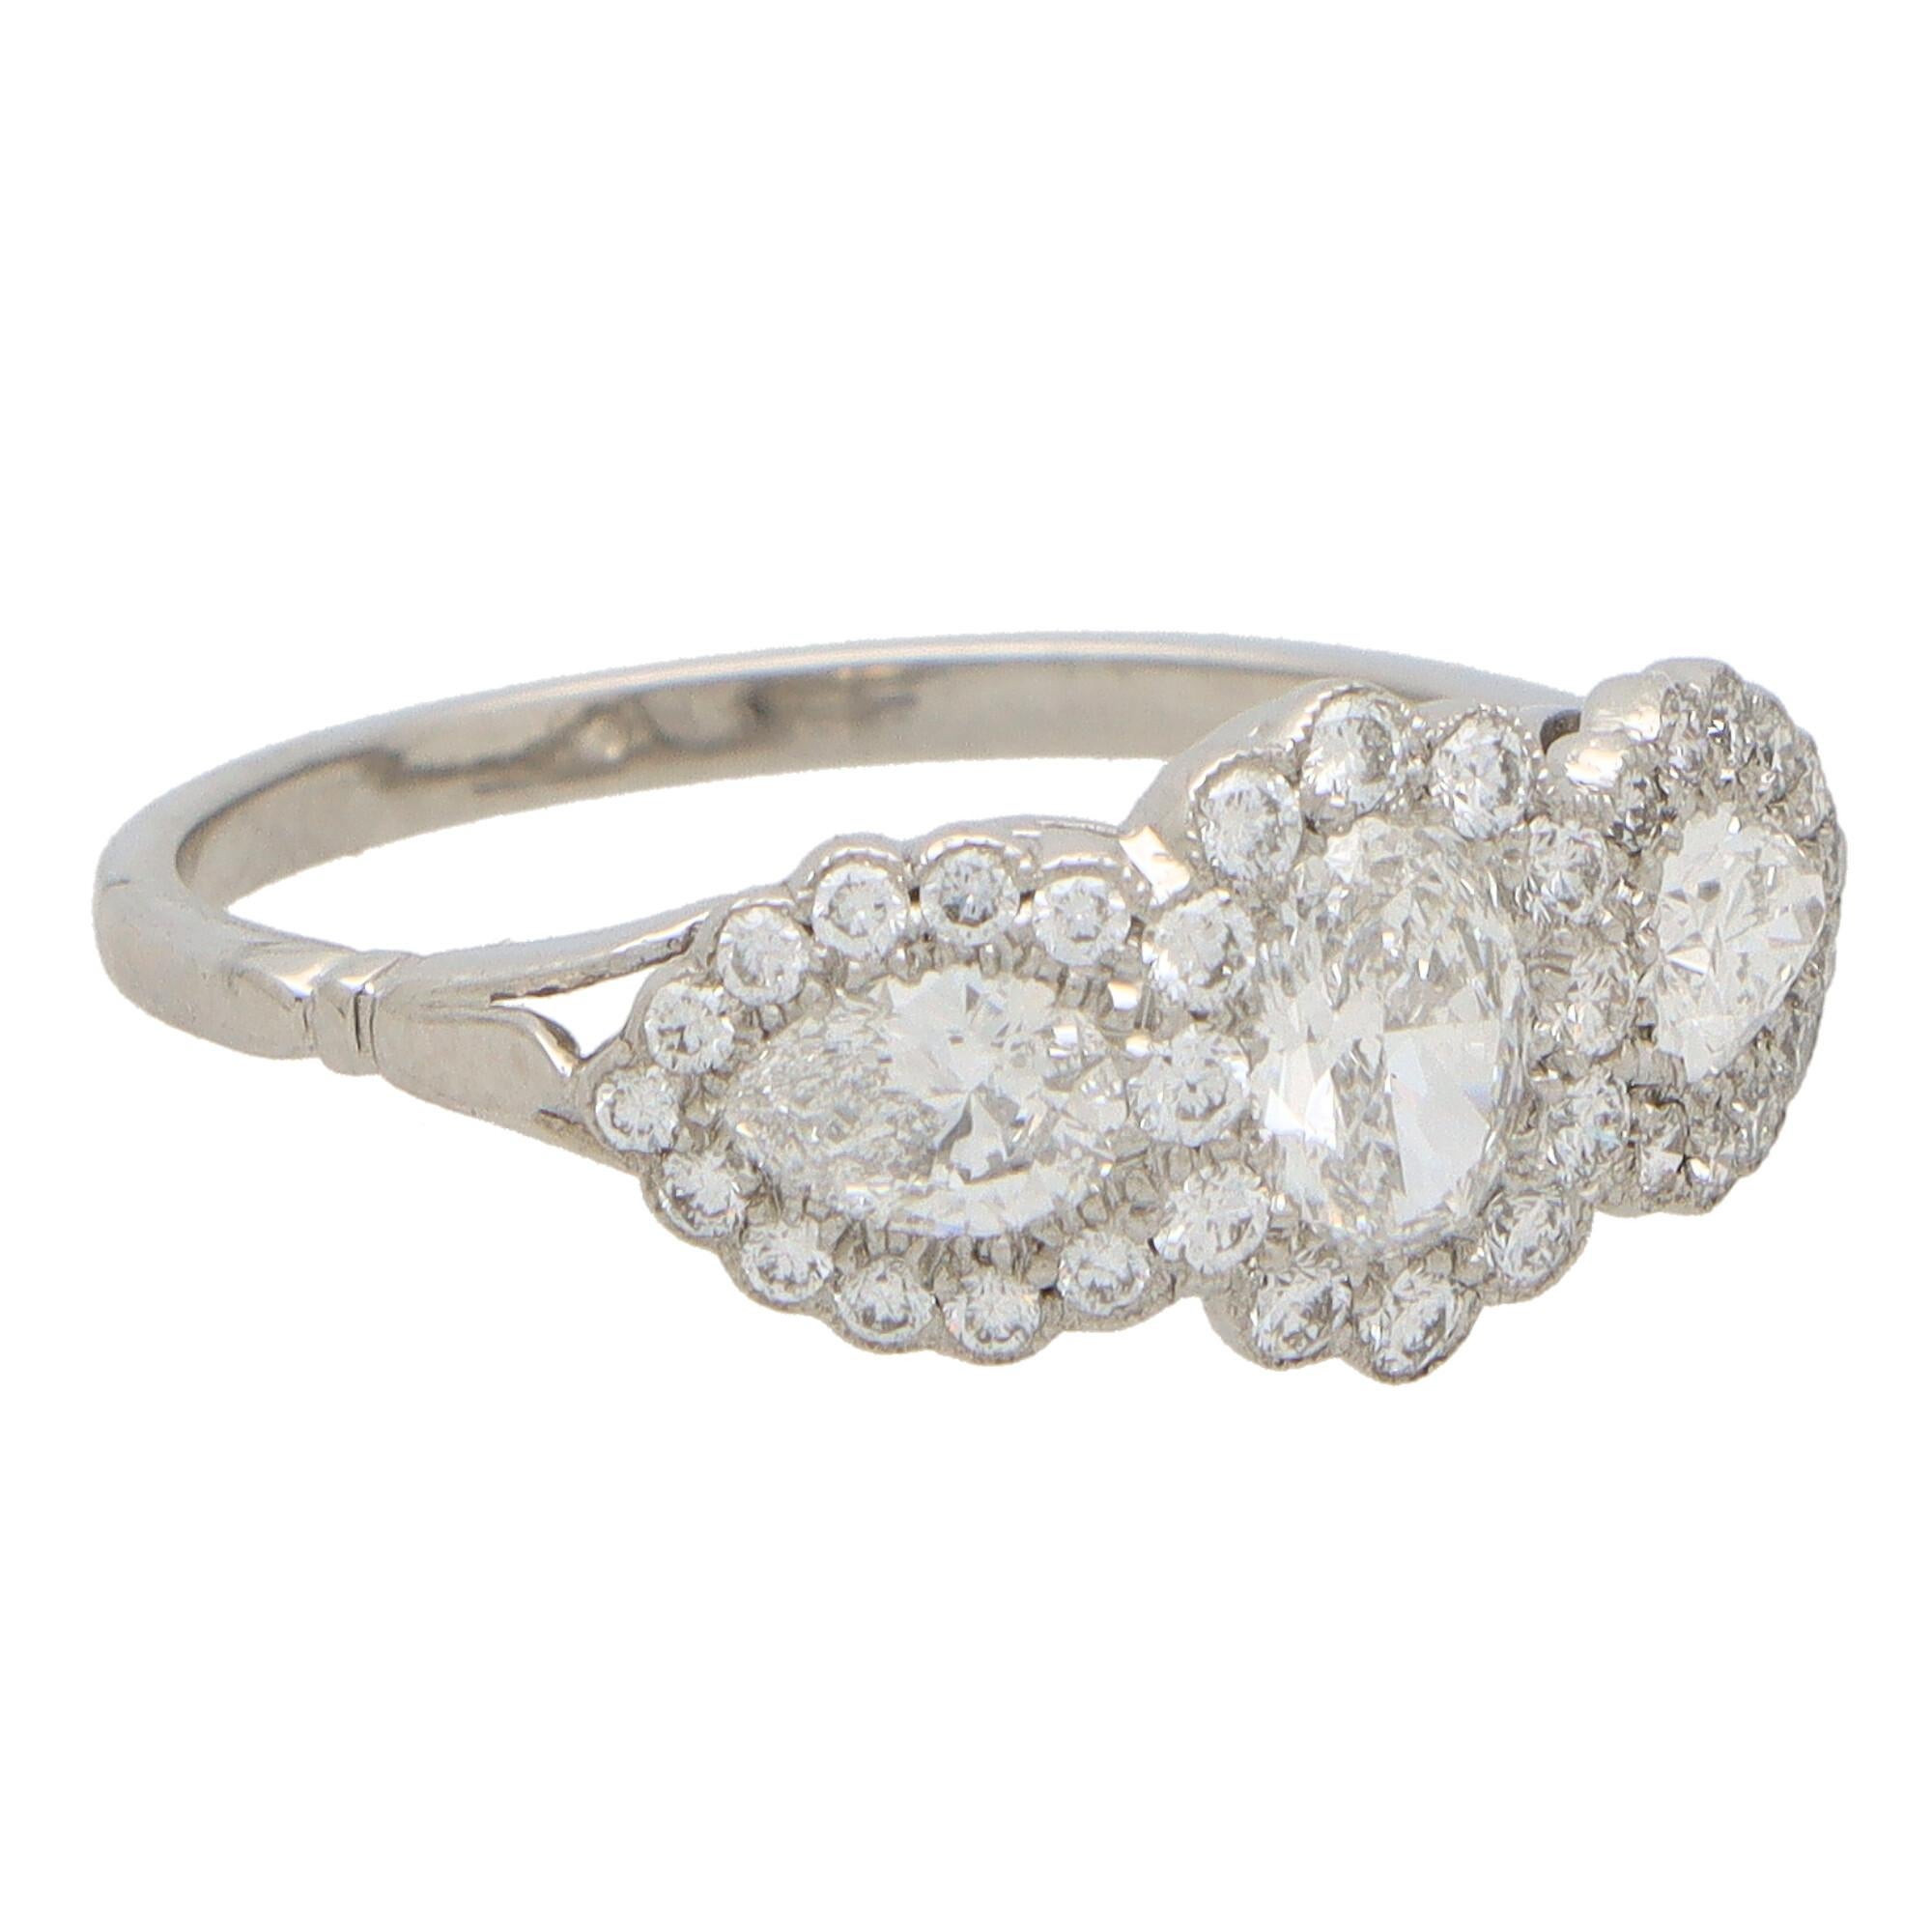 Oval Cut Oval Diamond Floral Cluster Three Stone Ring Set in Platinum